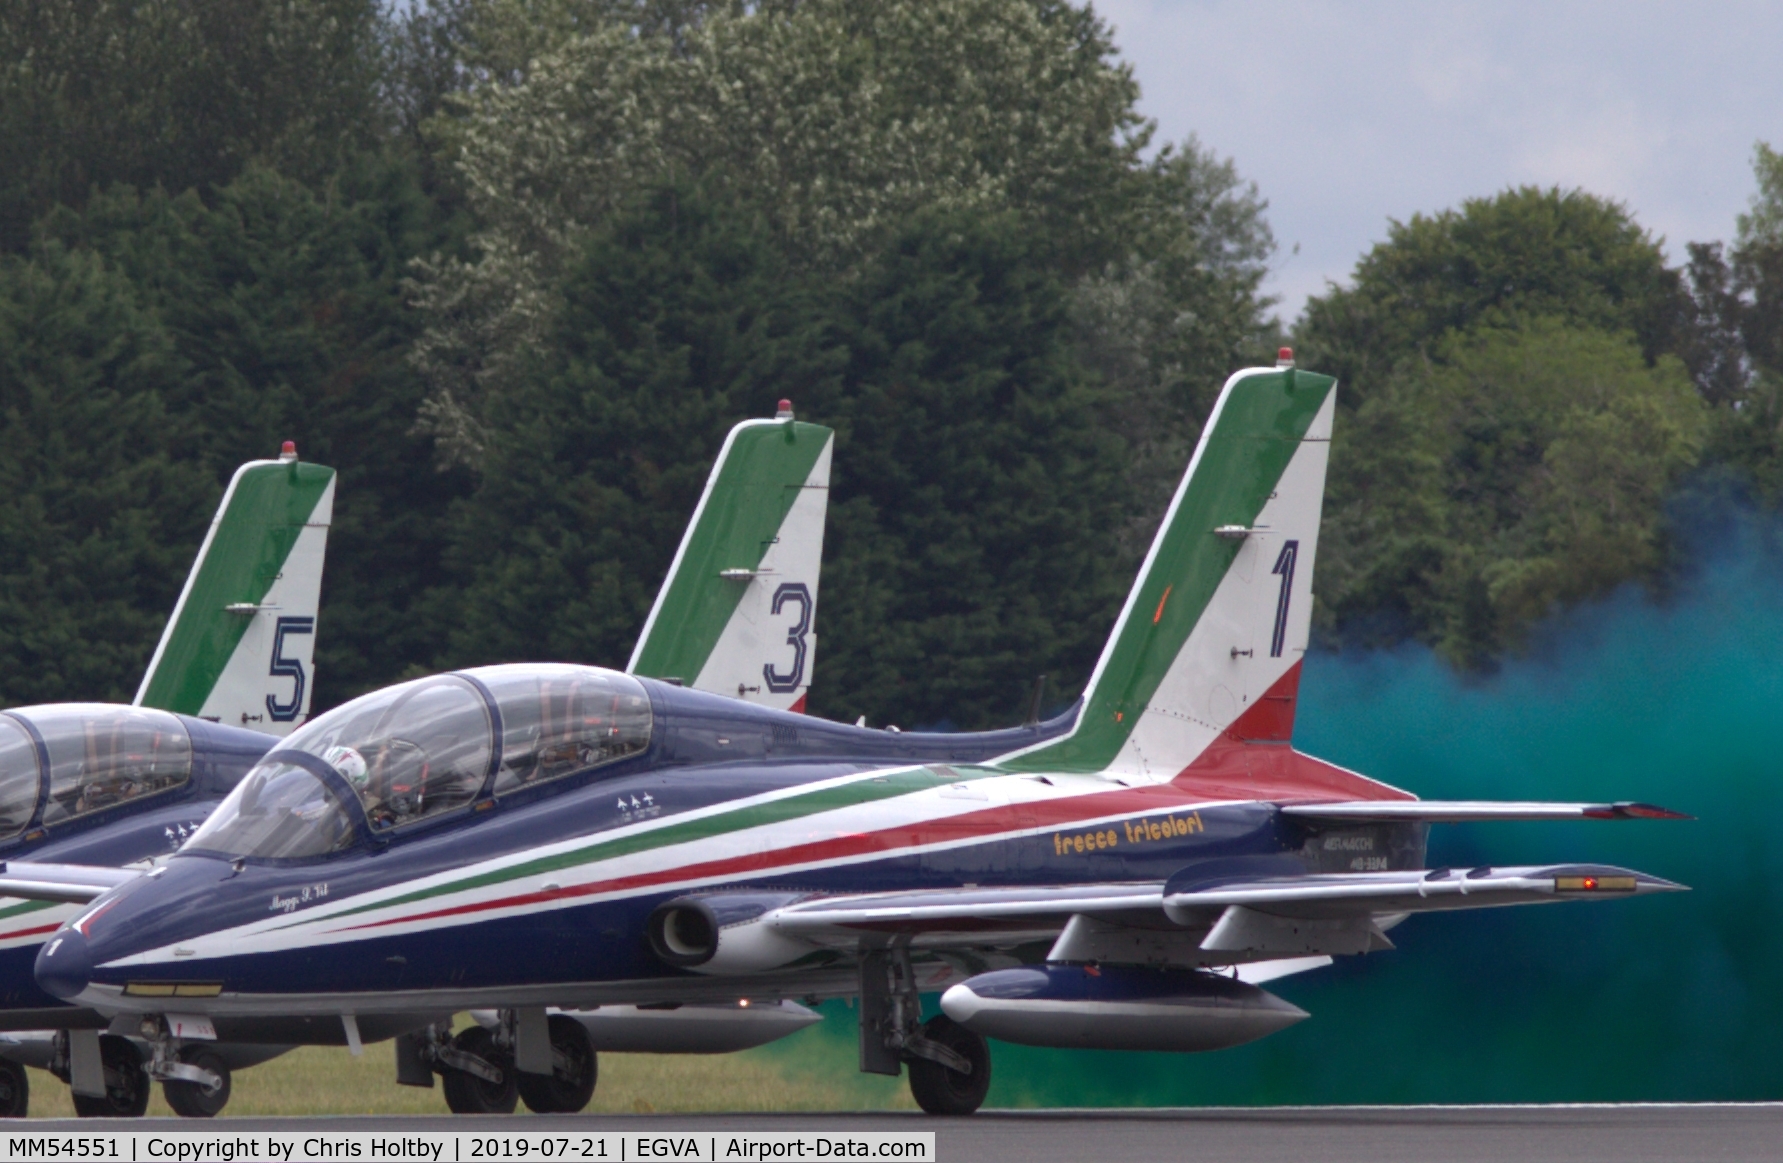 MM54551, Aermacchi MB-339PAN C/N 6772/167/AD018, Frecce Tricolori team leader about to take-off at RIAT 2019 RAF Fairford